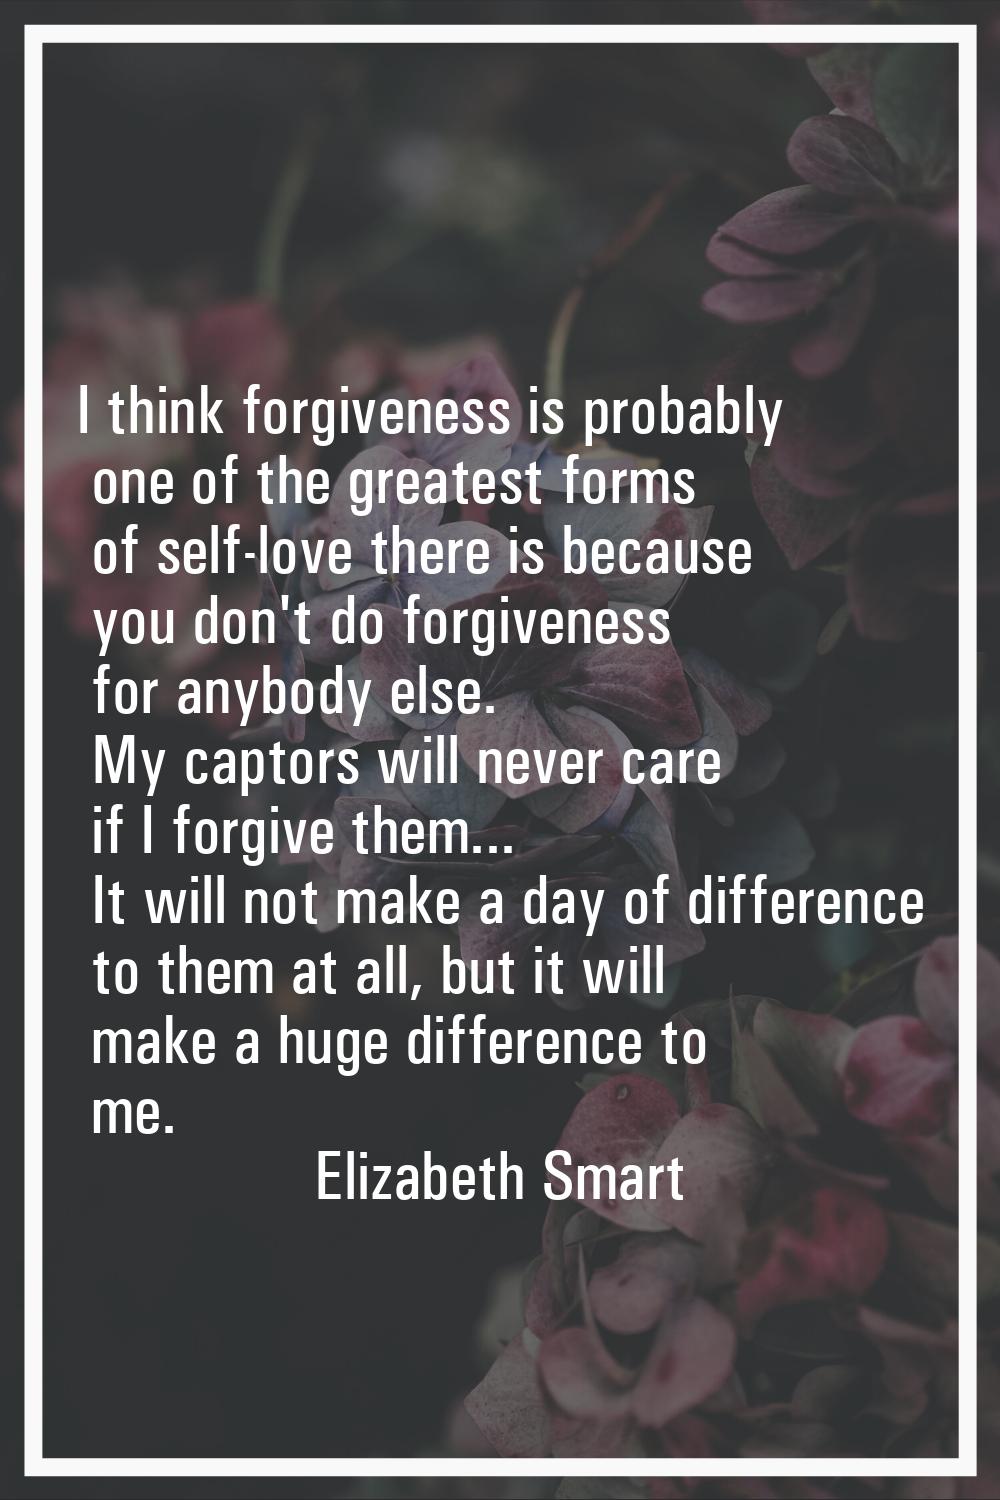 I think forgiveness is probably one of the greatest forms of self-love there is because you don't d